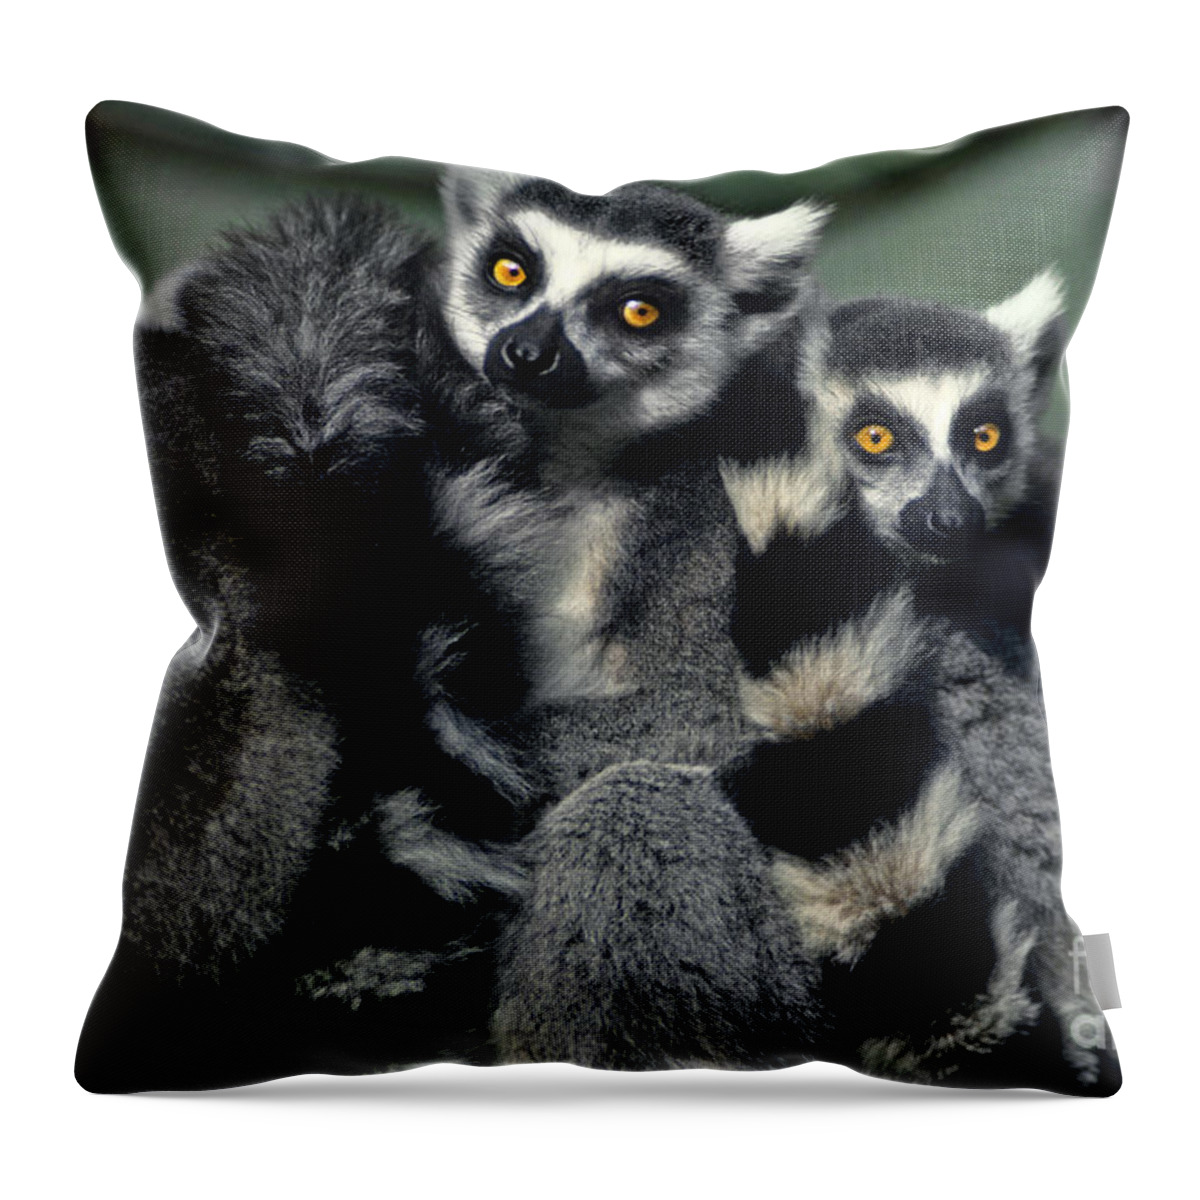 Africa Throw Pillow featuring the photograph Ringtailed Lemurs Portrait Endangered Wildlife by Dave Welling